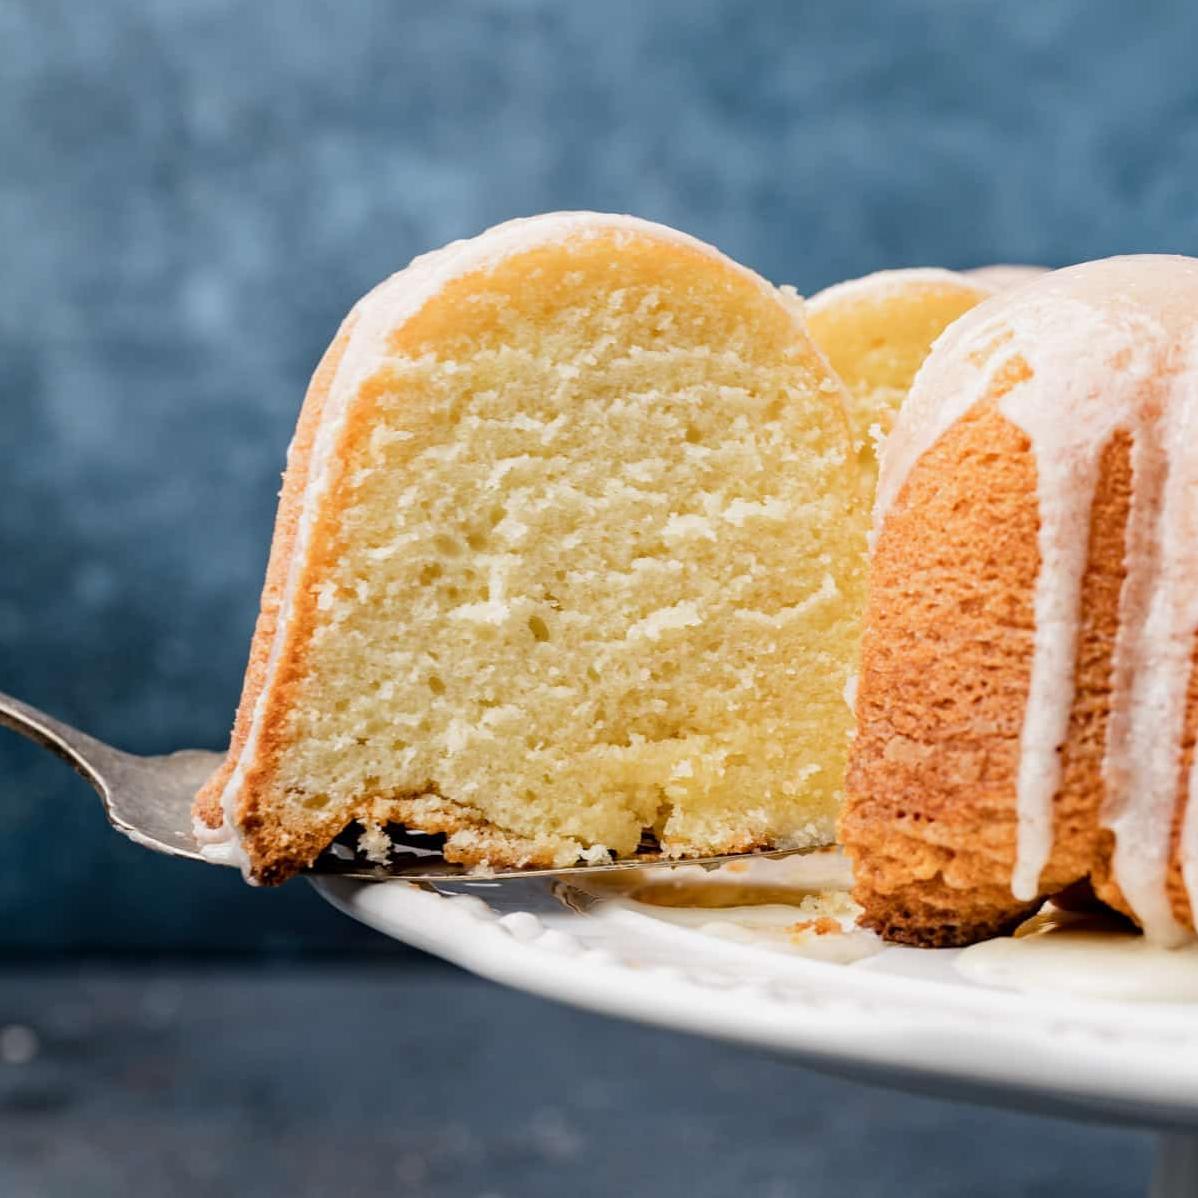  This cake is worth its weight in gold (or should we say, pounds!)